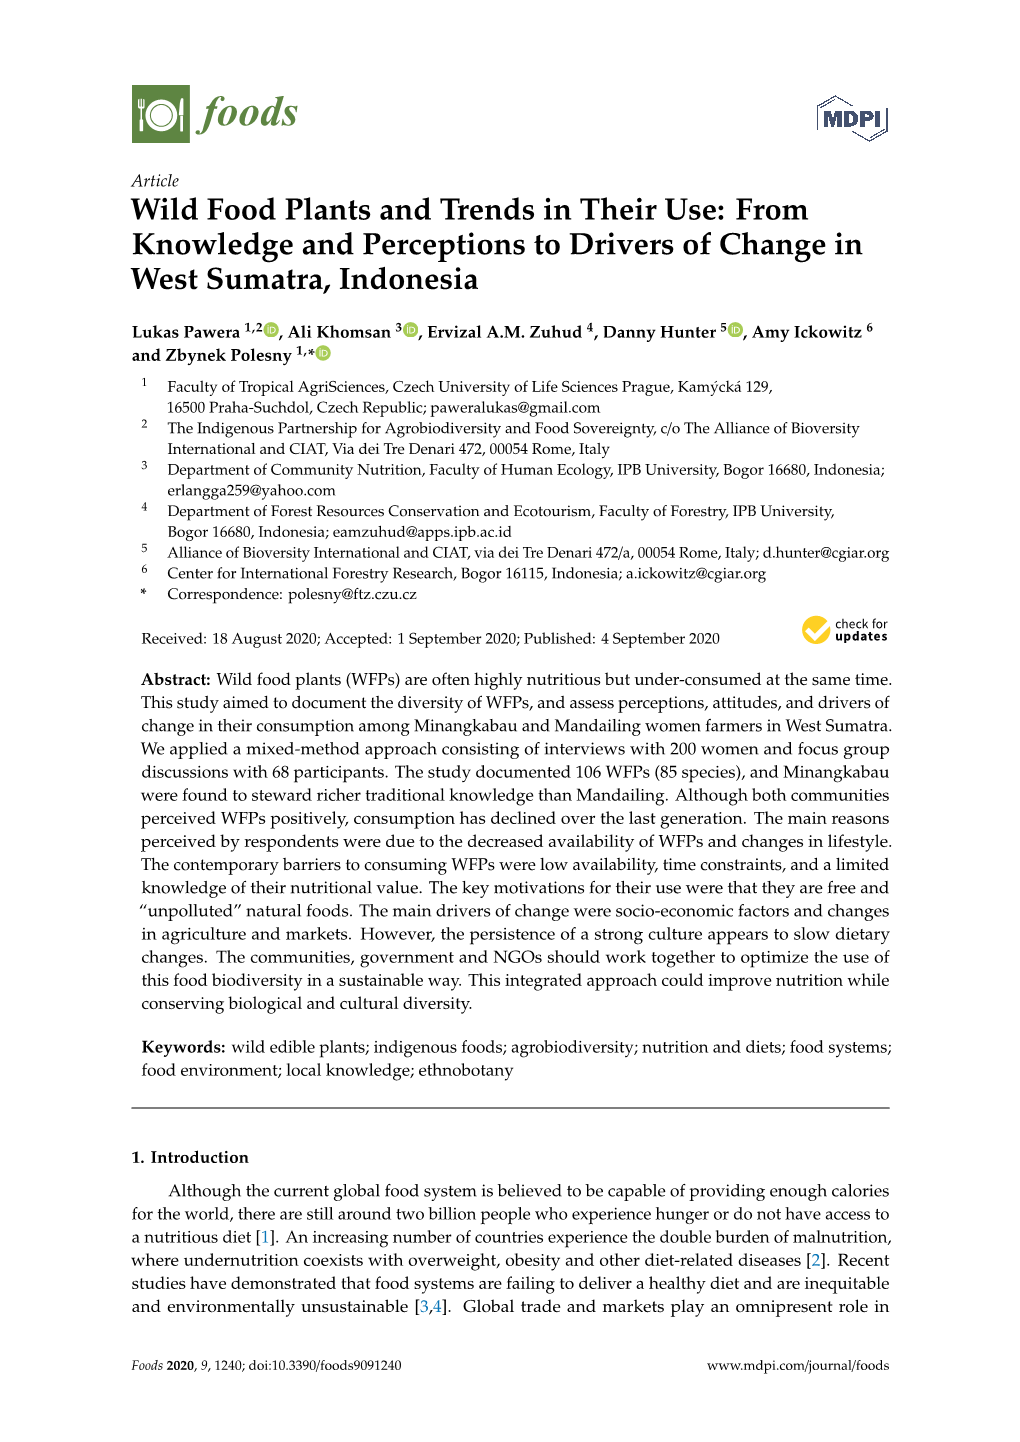 Wild Food Plants and Trends in Their Use: from Knowledge and Perceptions to Drivers of Change in West Sumatra, Indonesia